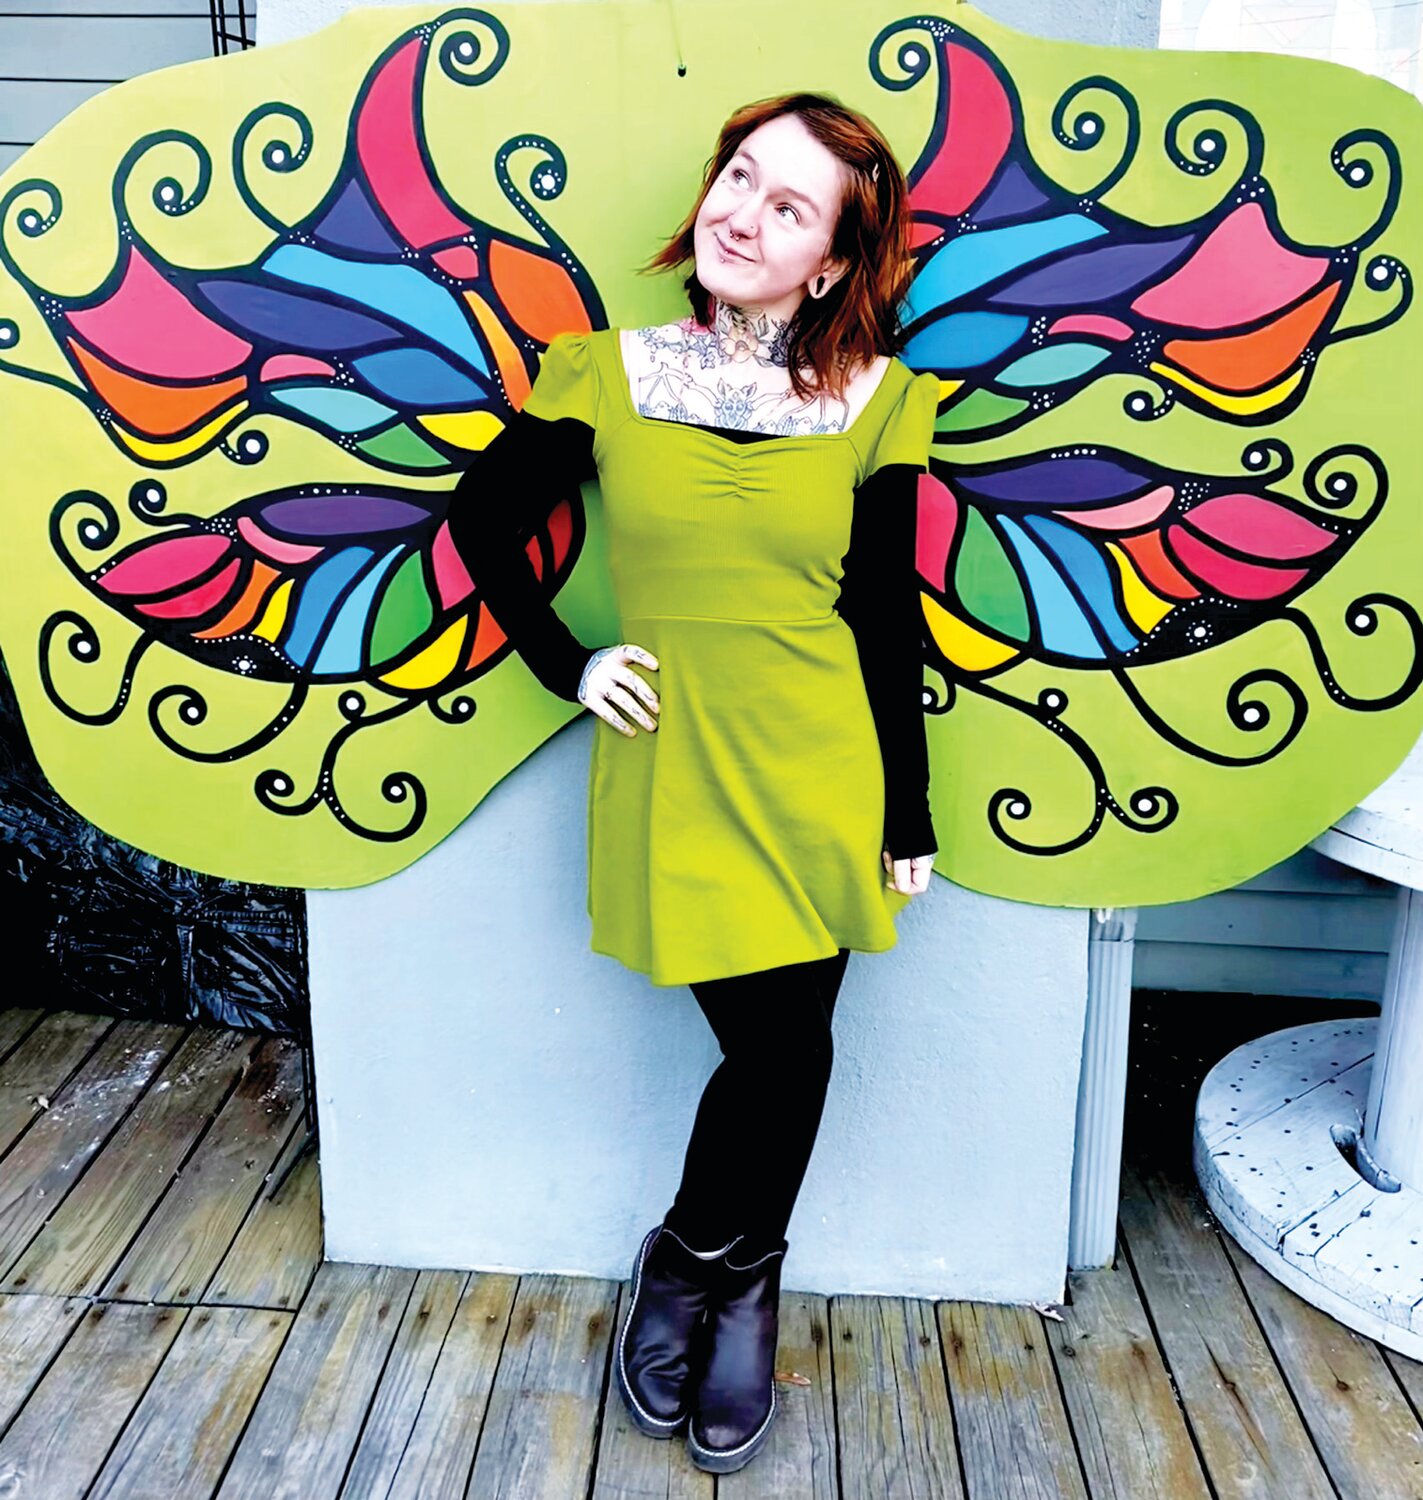 Hope Gaburo poses with Scrambled’s wings, which were created by Erin Simmons, who opened the gallery but turned it over to Gaburo before she died in February 2022.